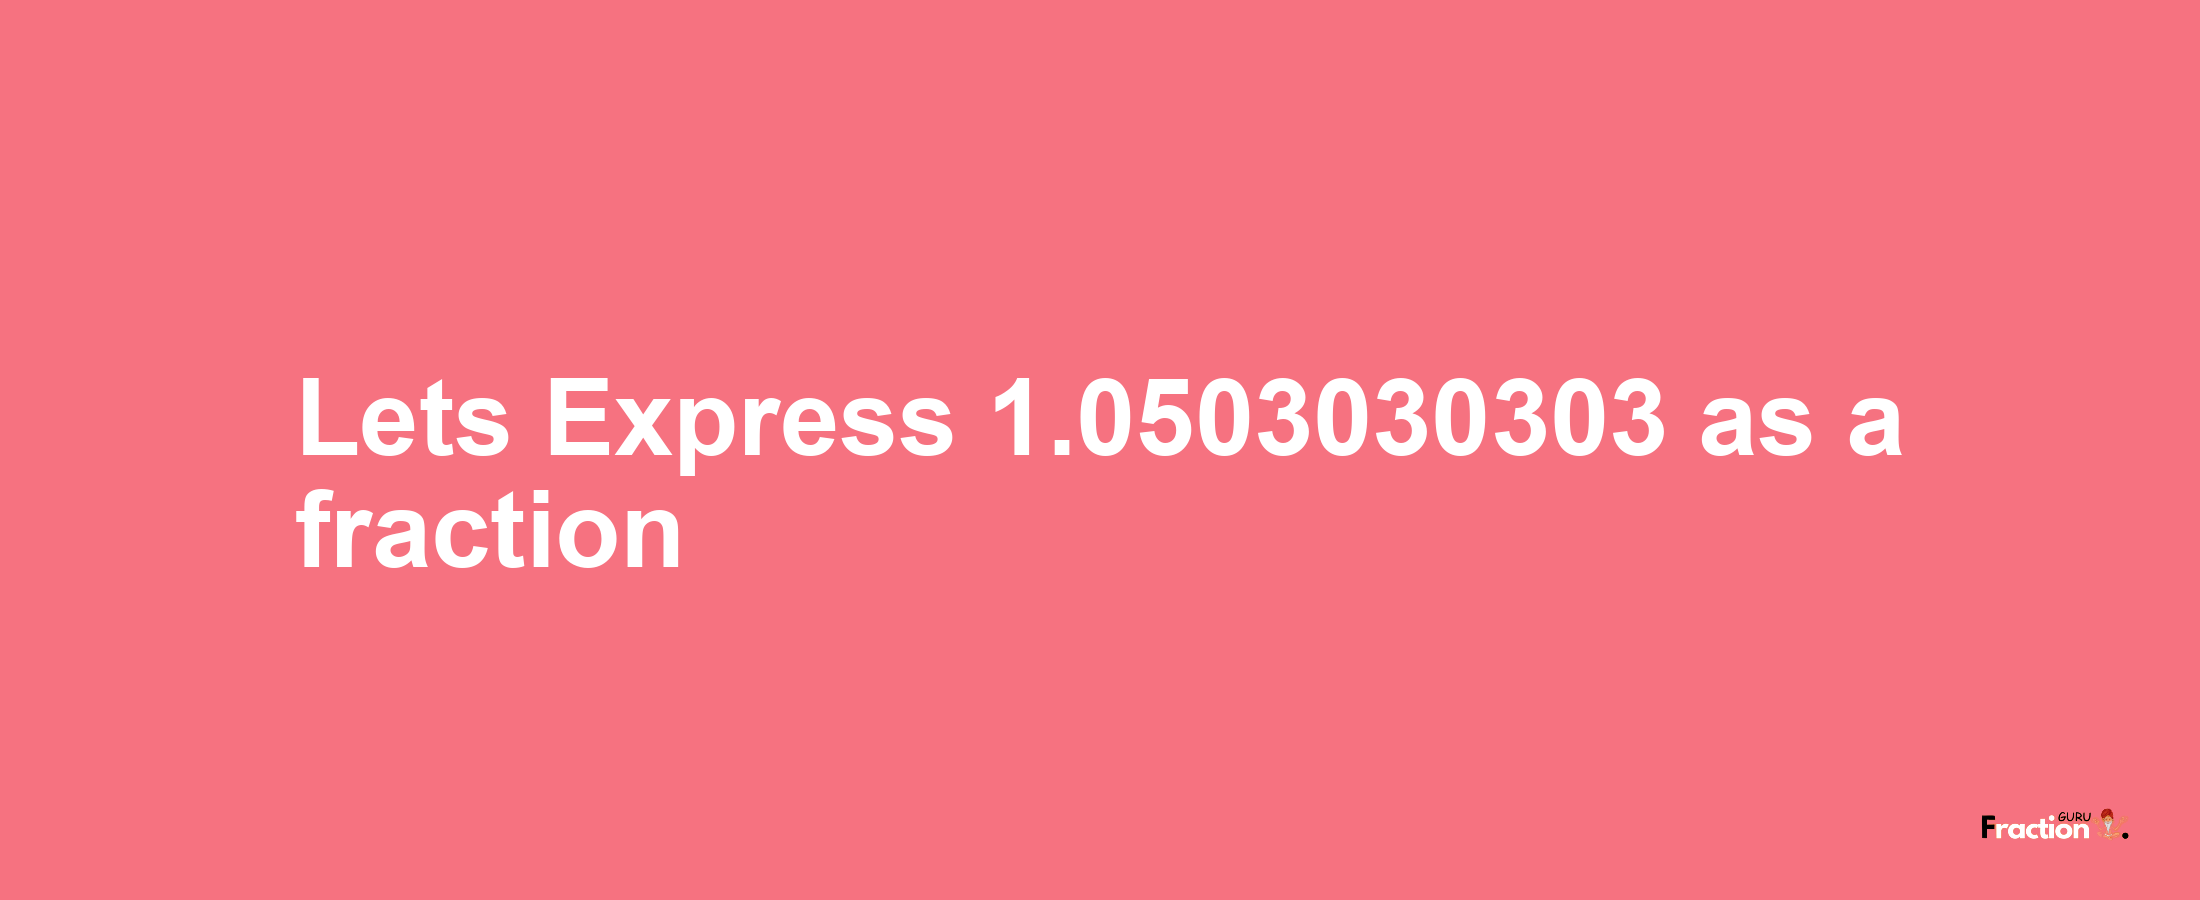 Lets Express 1.0503030303 as afraction